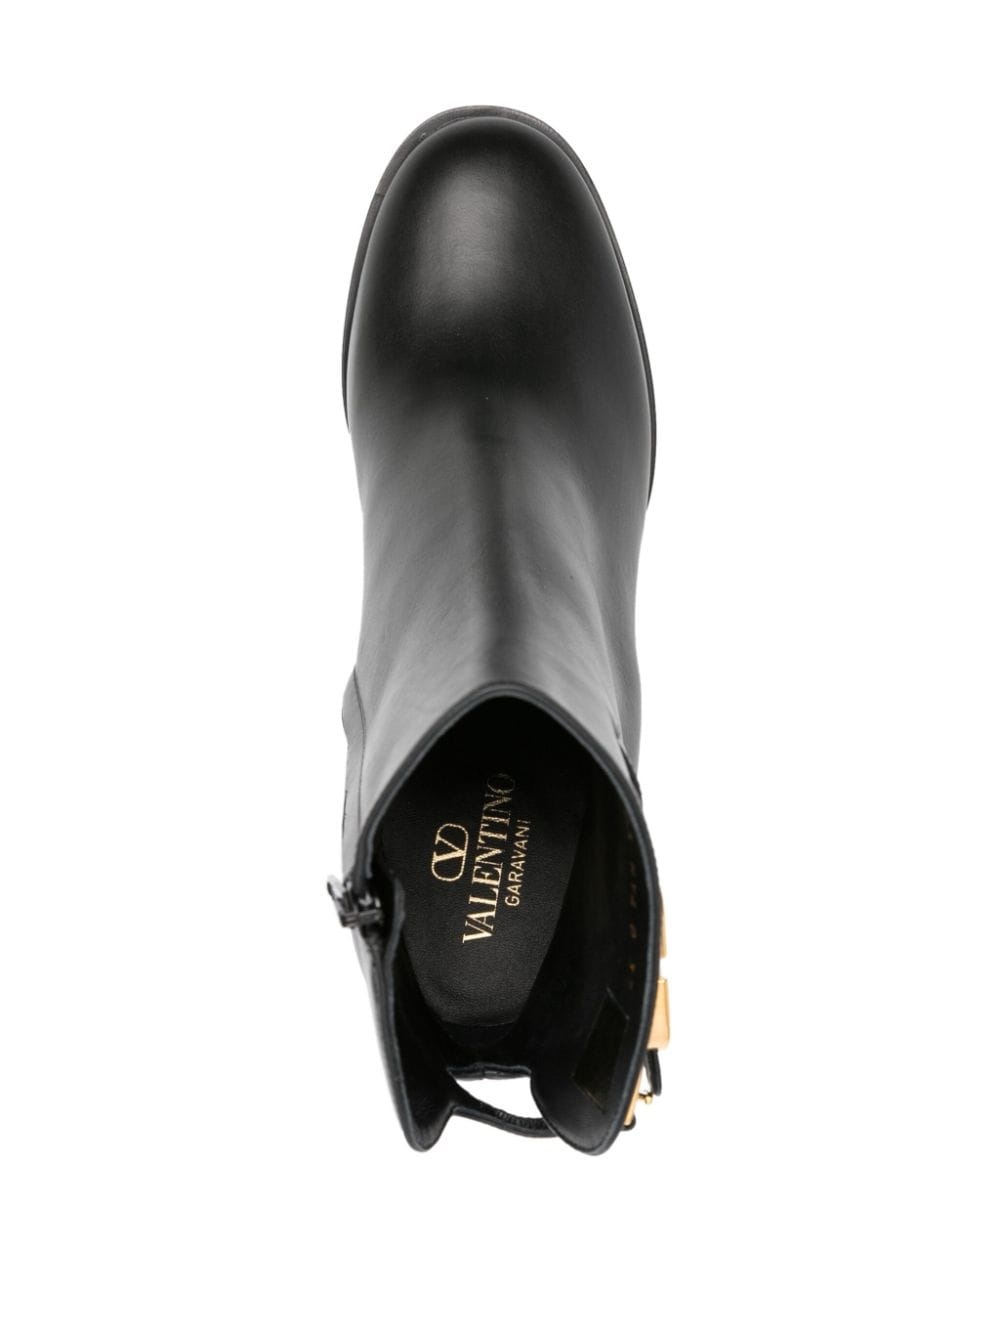 VLogo Signature 70mm leather boots - 4